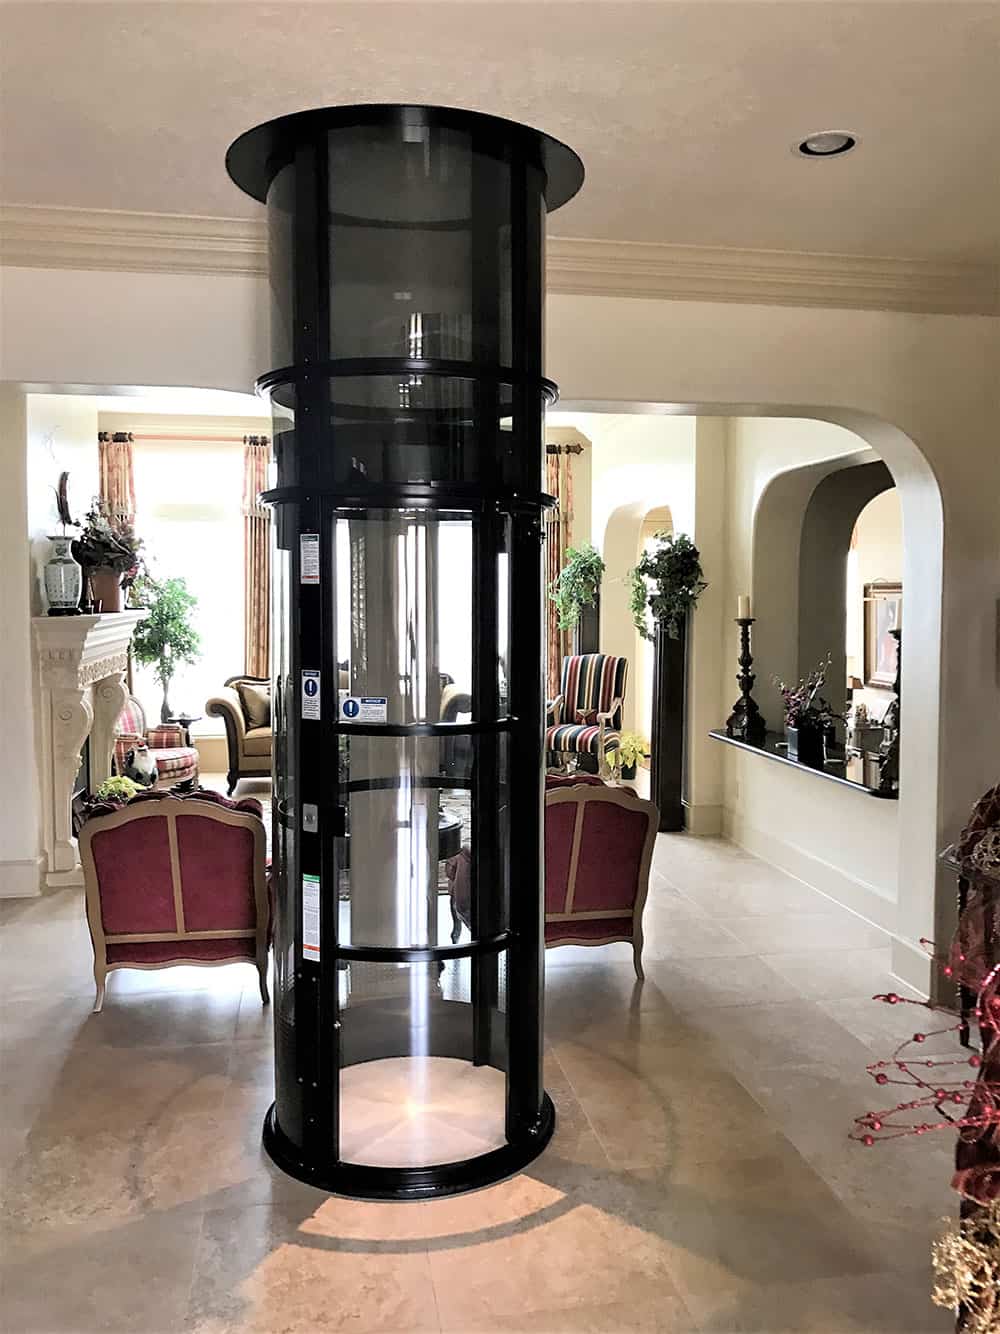 residential elevator for 2 people installed in a Champions area home in houston texas